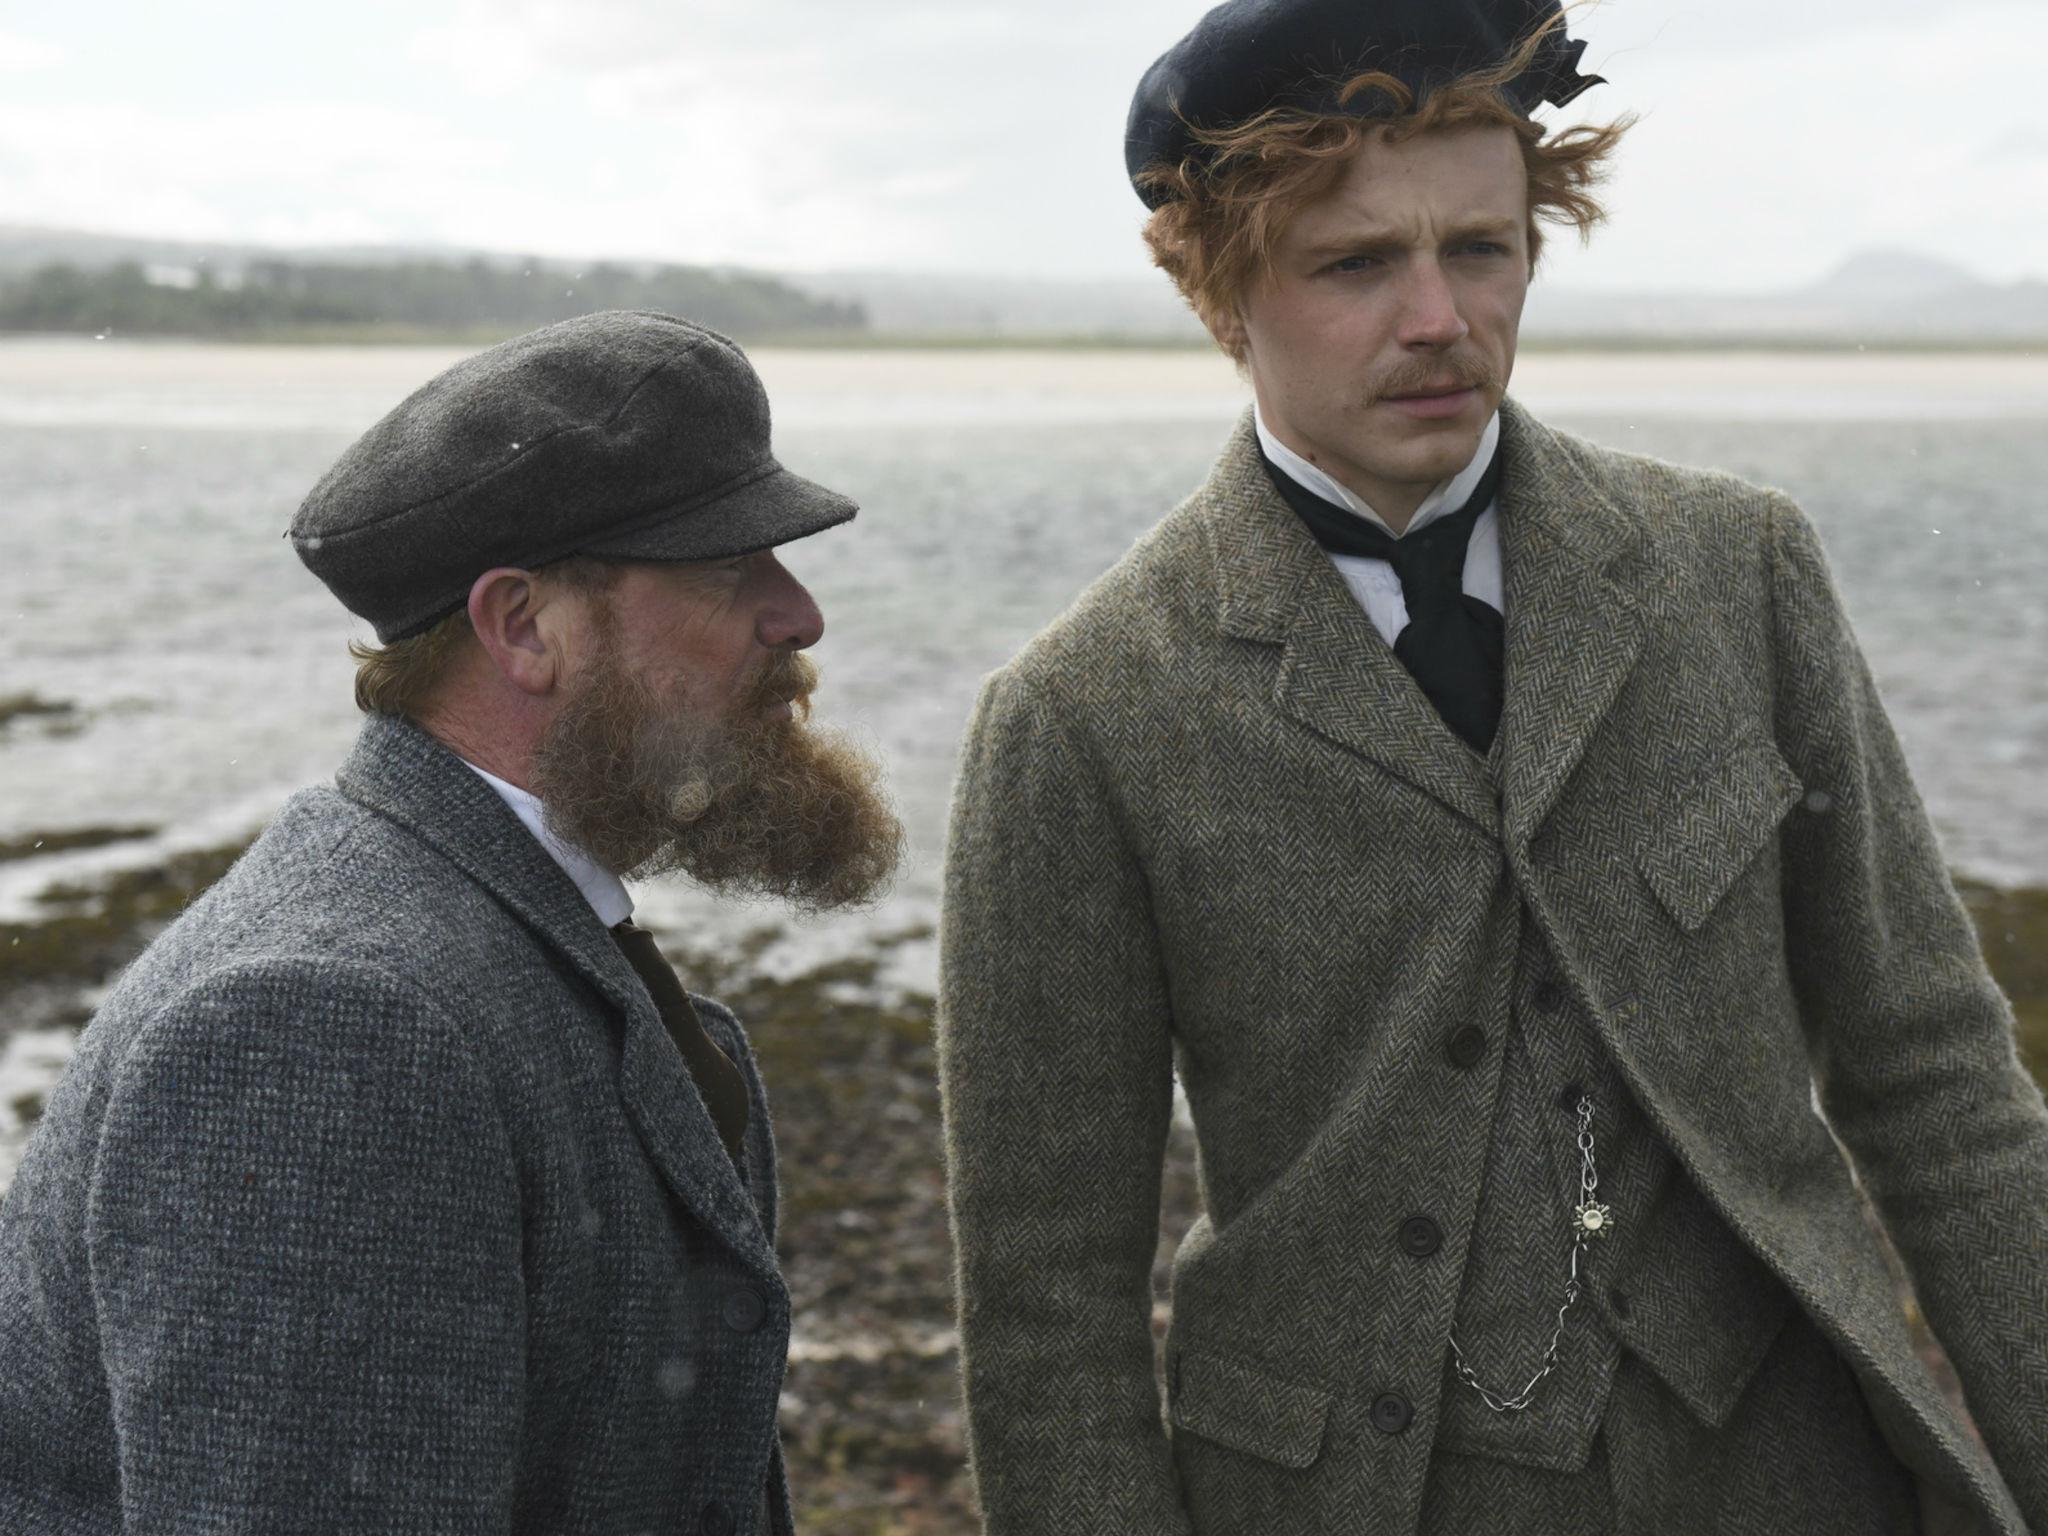 A scene from Tommy's Honour starring Jack Lowden and Peter Mullan